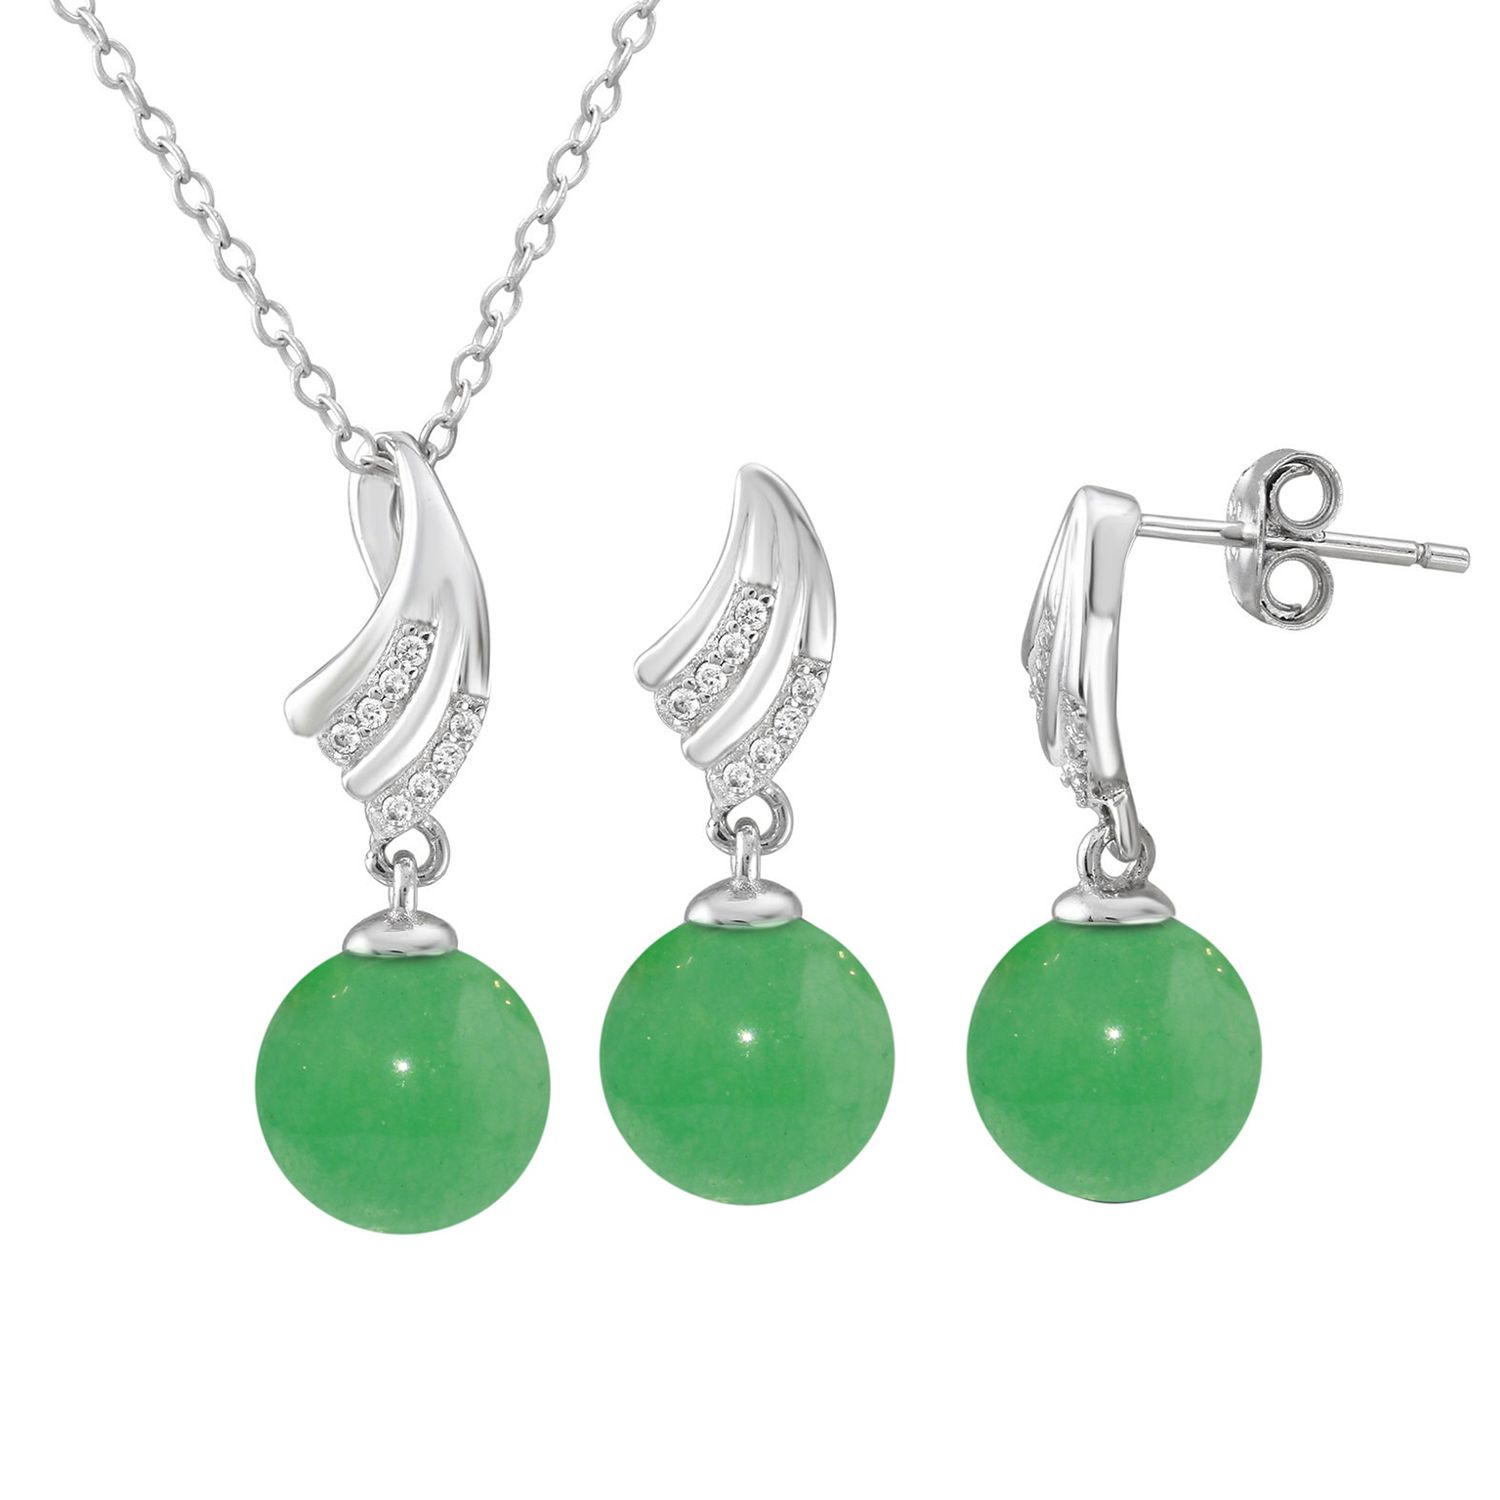 jade earrings and necklace set